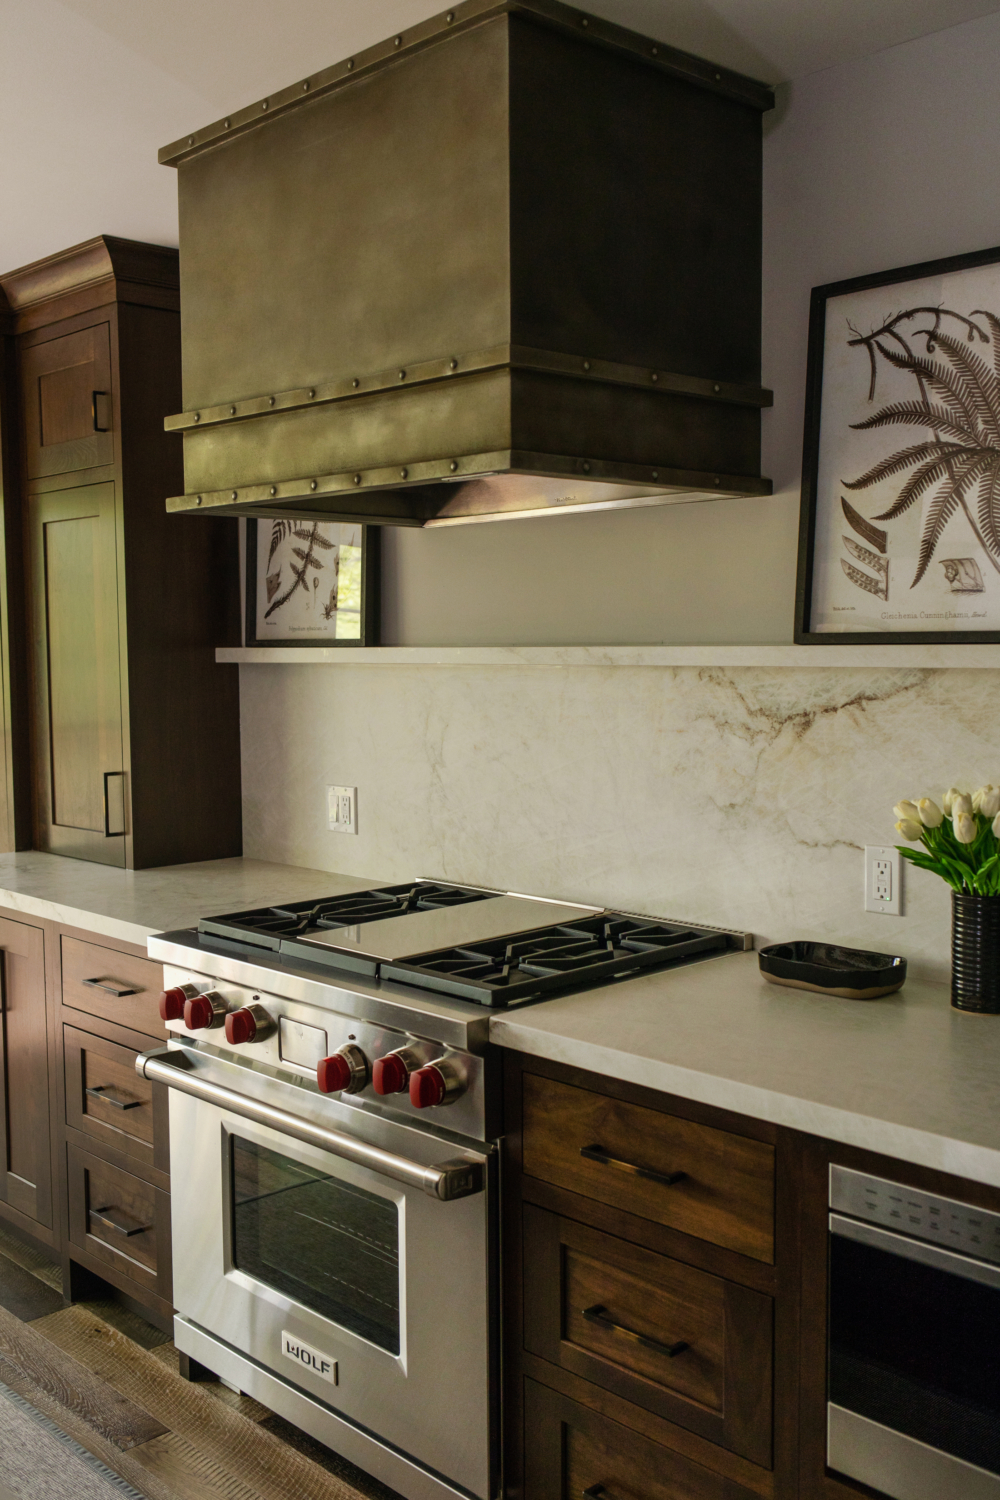 La Bastille Metal Hood, Shiloh Cabinetry, Photo by Shanna Wolf